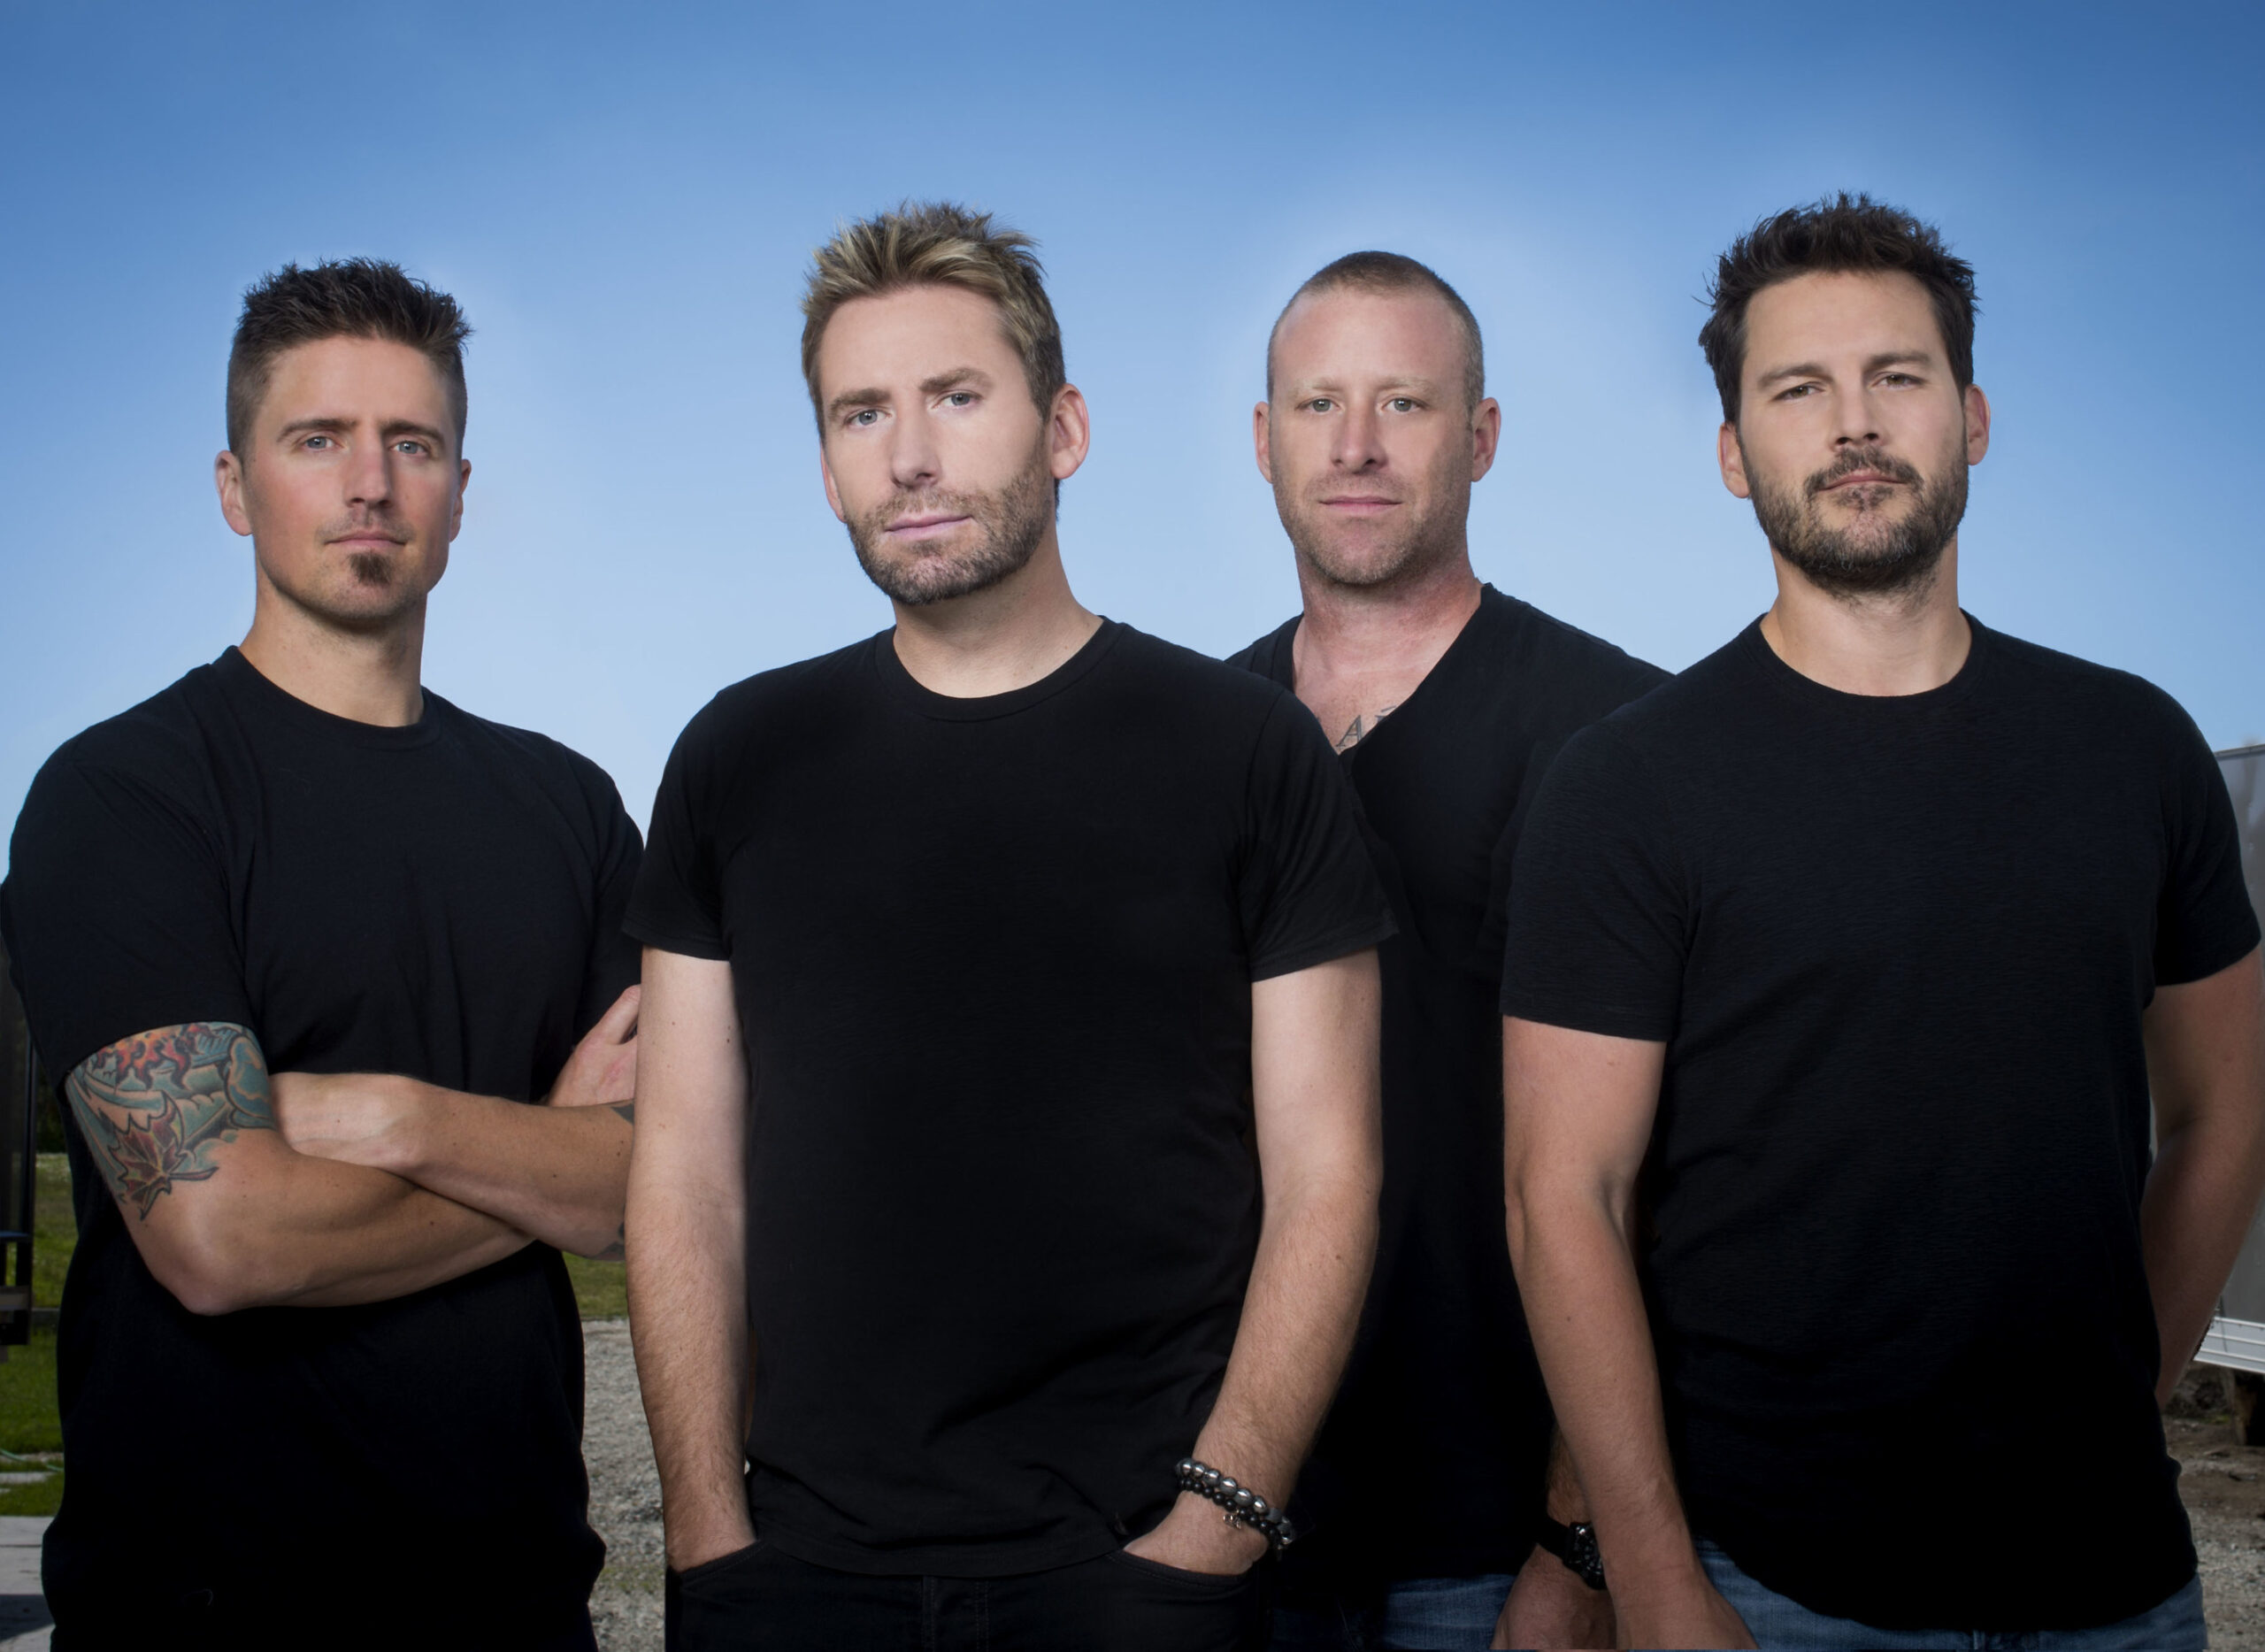 Nickelback 'Feed The Machine' With 44-City North American Tour, New Single  And Ninth Studio Album - Live Nation Entertainment